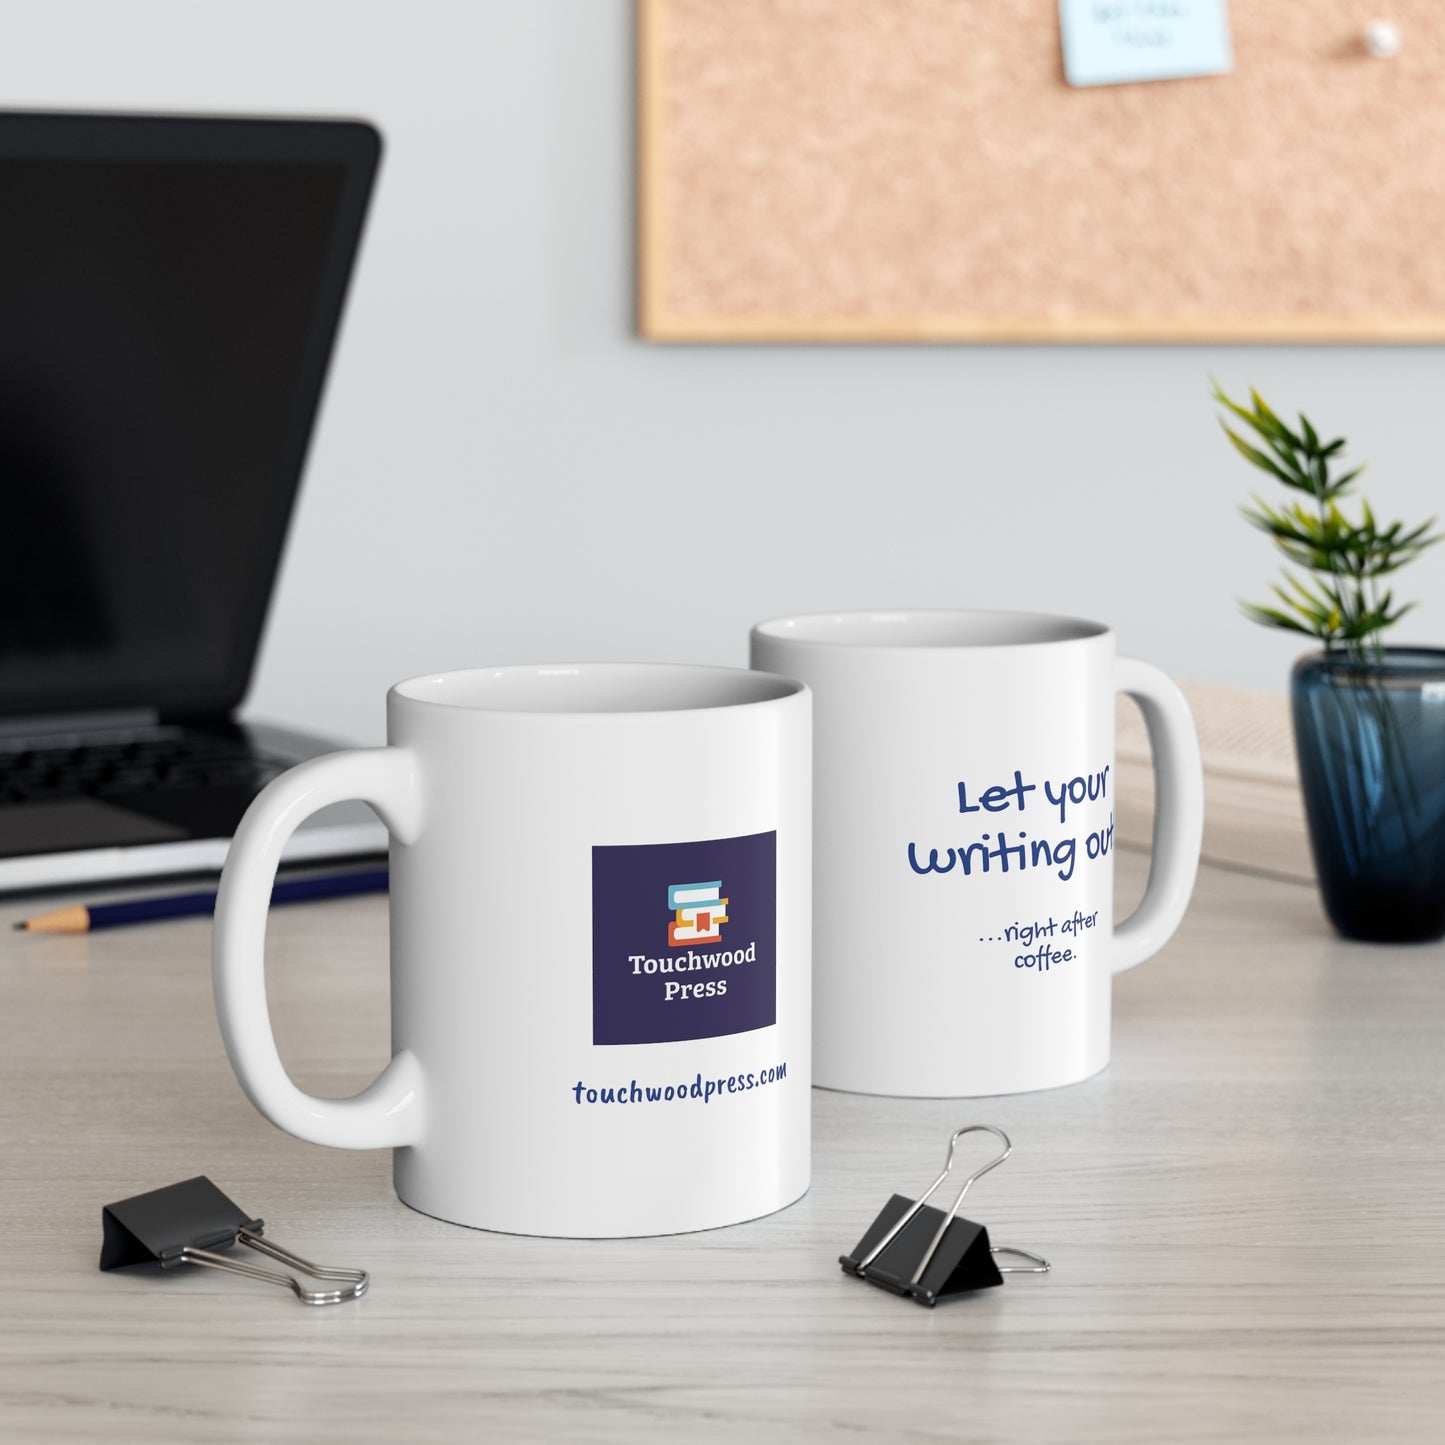 Let your writing out! mug